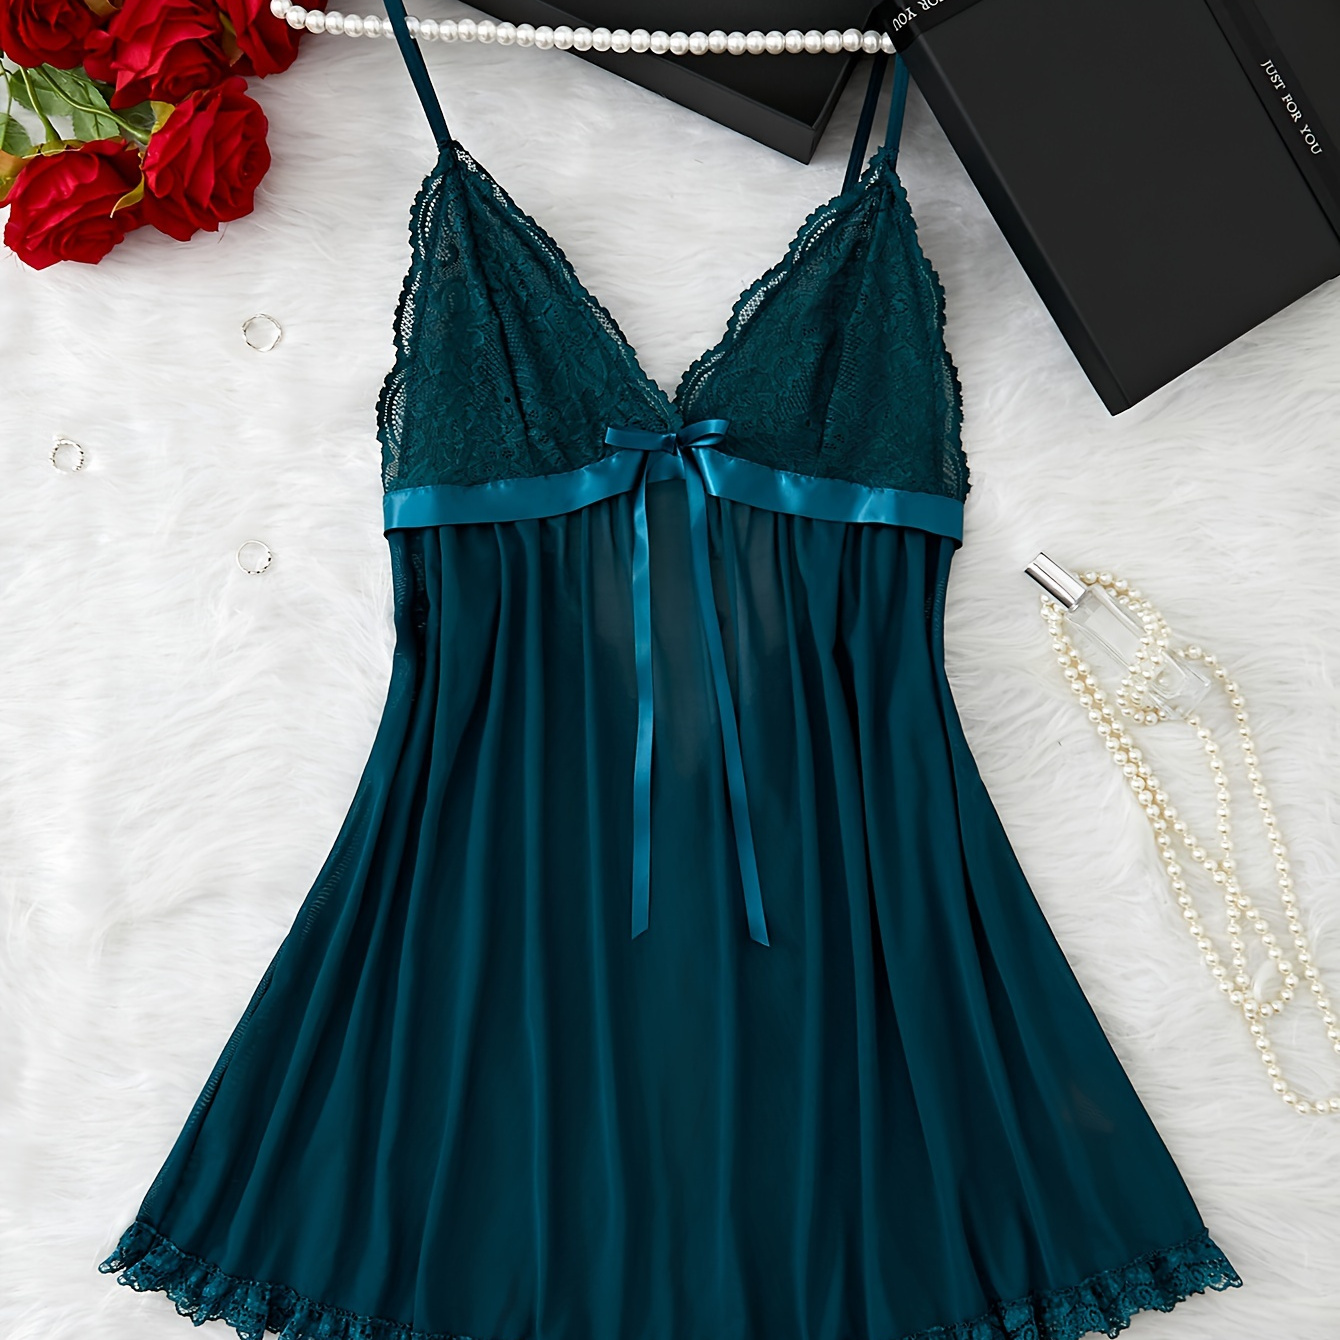 

Solid Bow Decor Contrast Lace Nightgown, Sexy V Neck Backless Mini Slip Dress, Women's Sleepwear